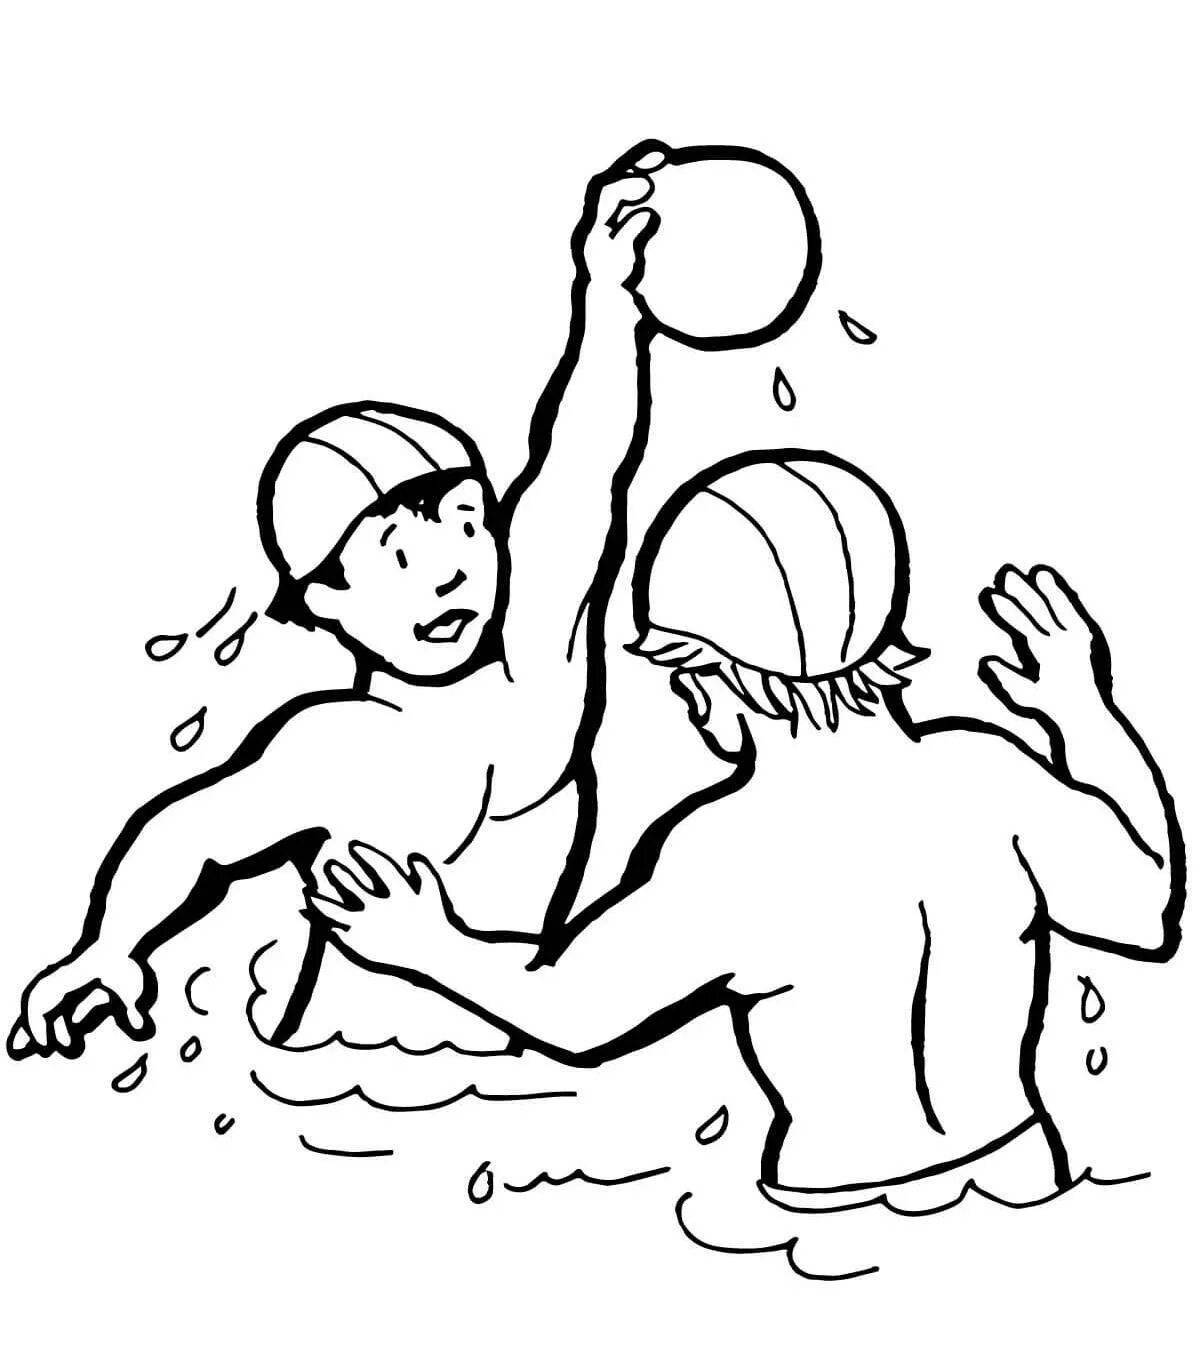 Colorful summer sports coloring page